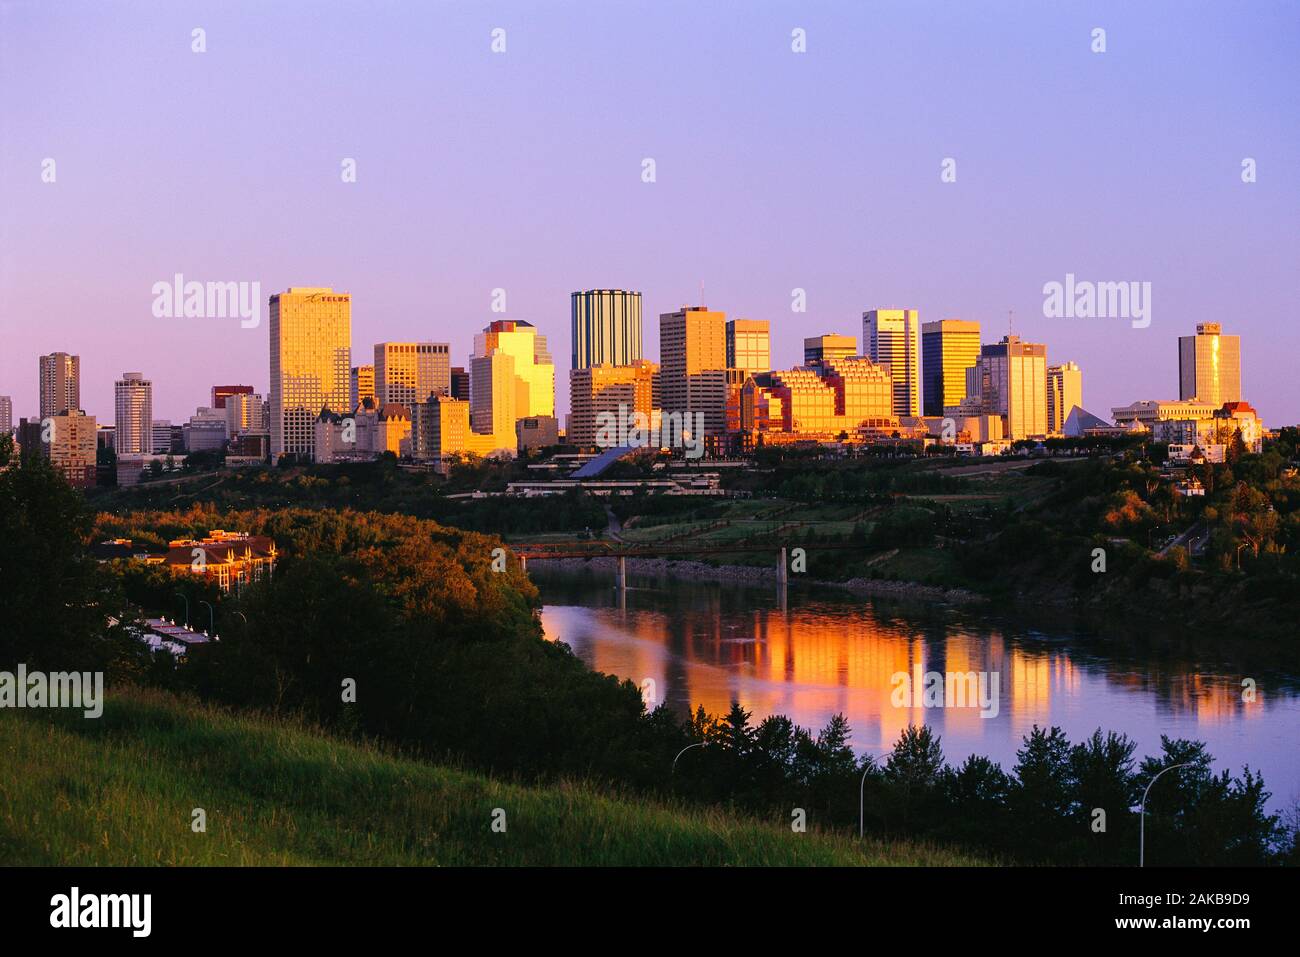 Skyline of city of Edmonton and river seen from park, Alberta, Canada Stock Photo